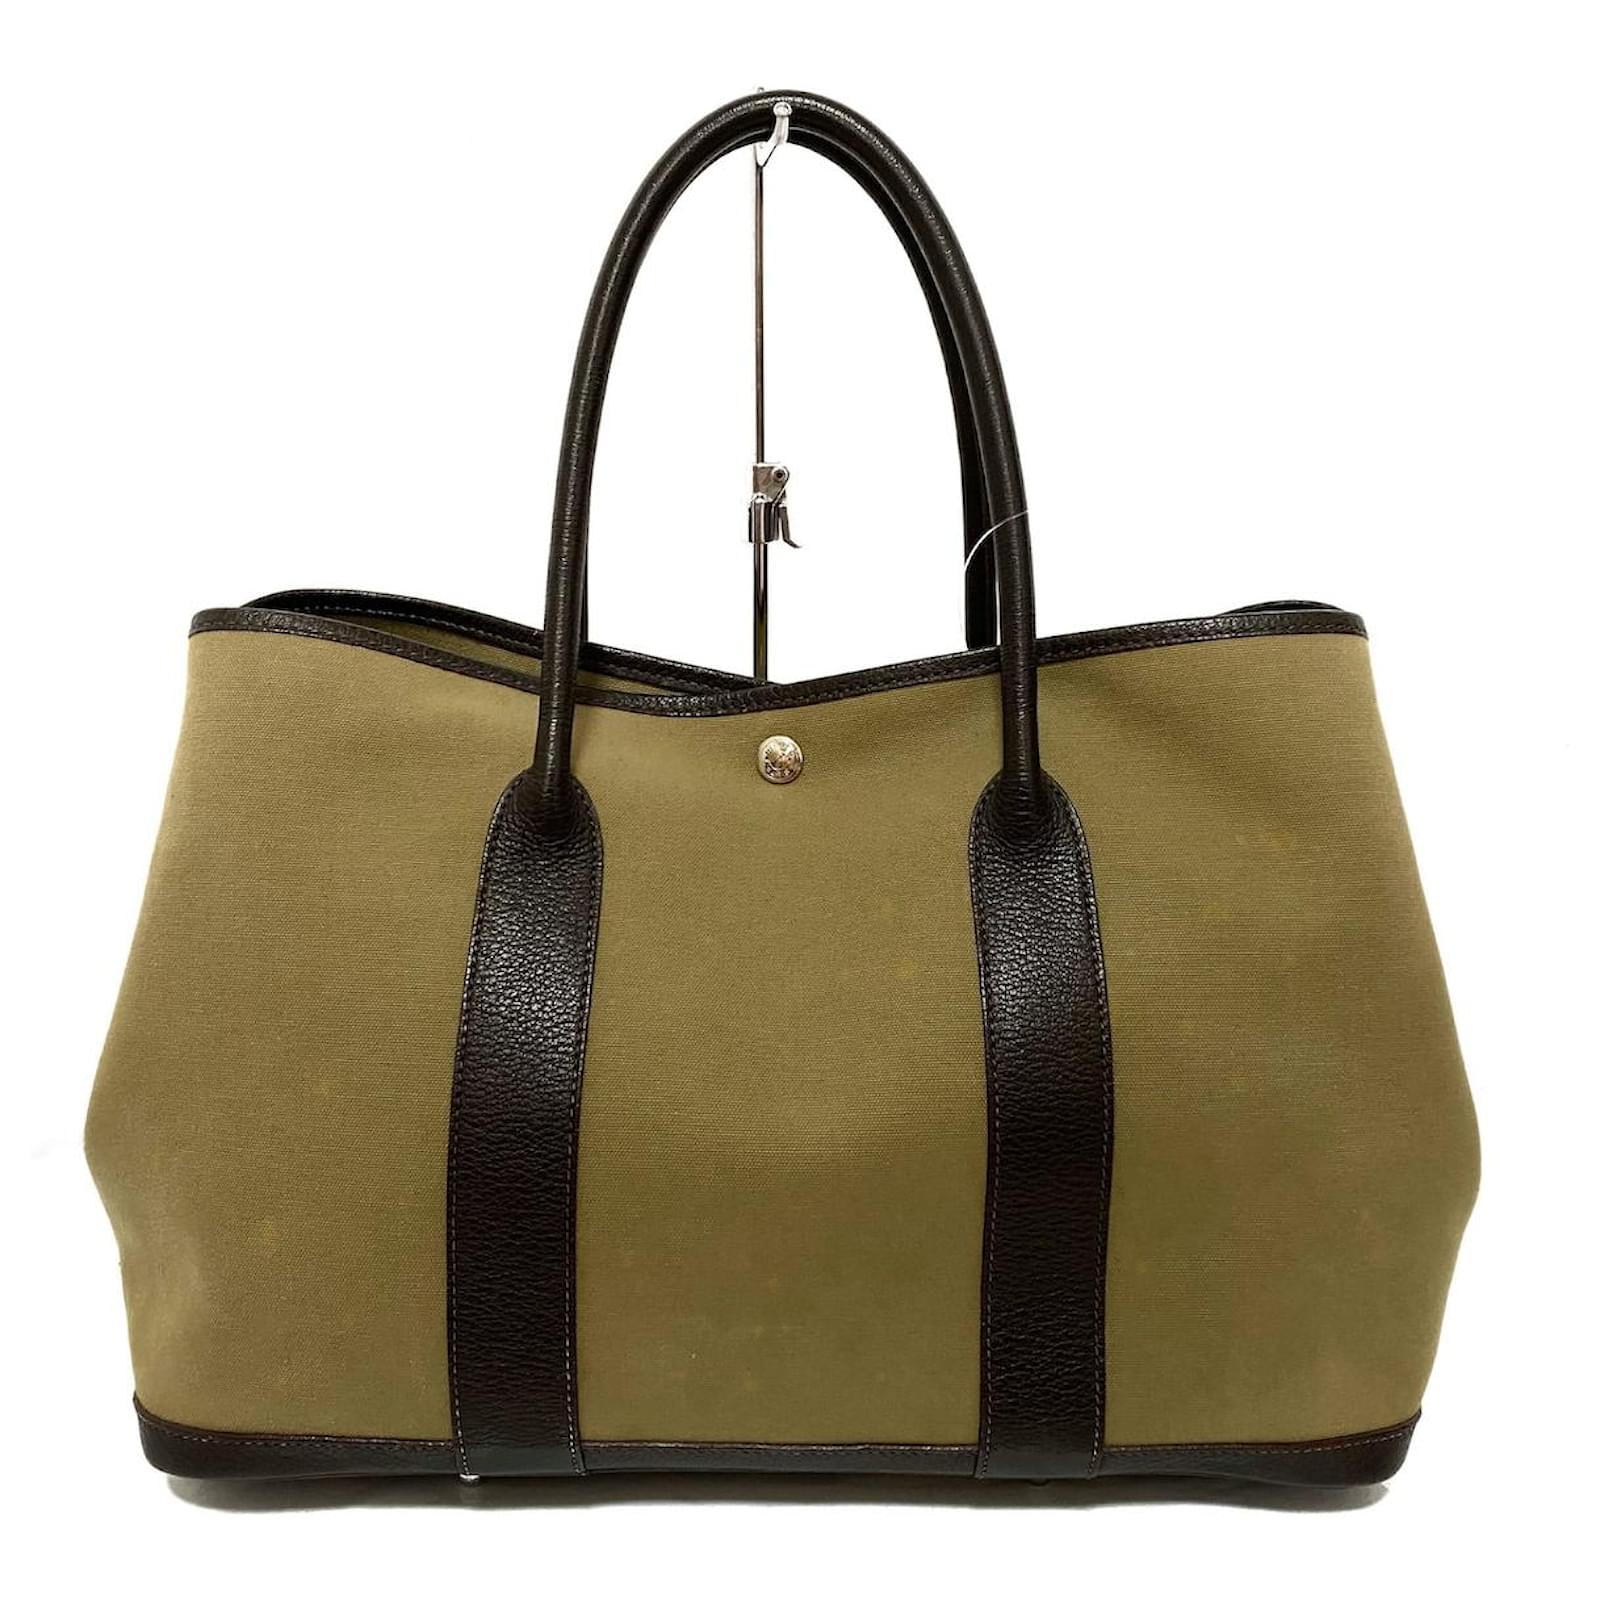 HERMES Garden party bag in khaki canvas and leather two-tone